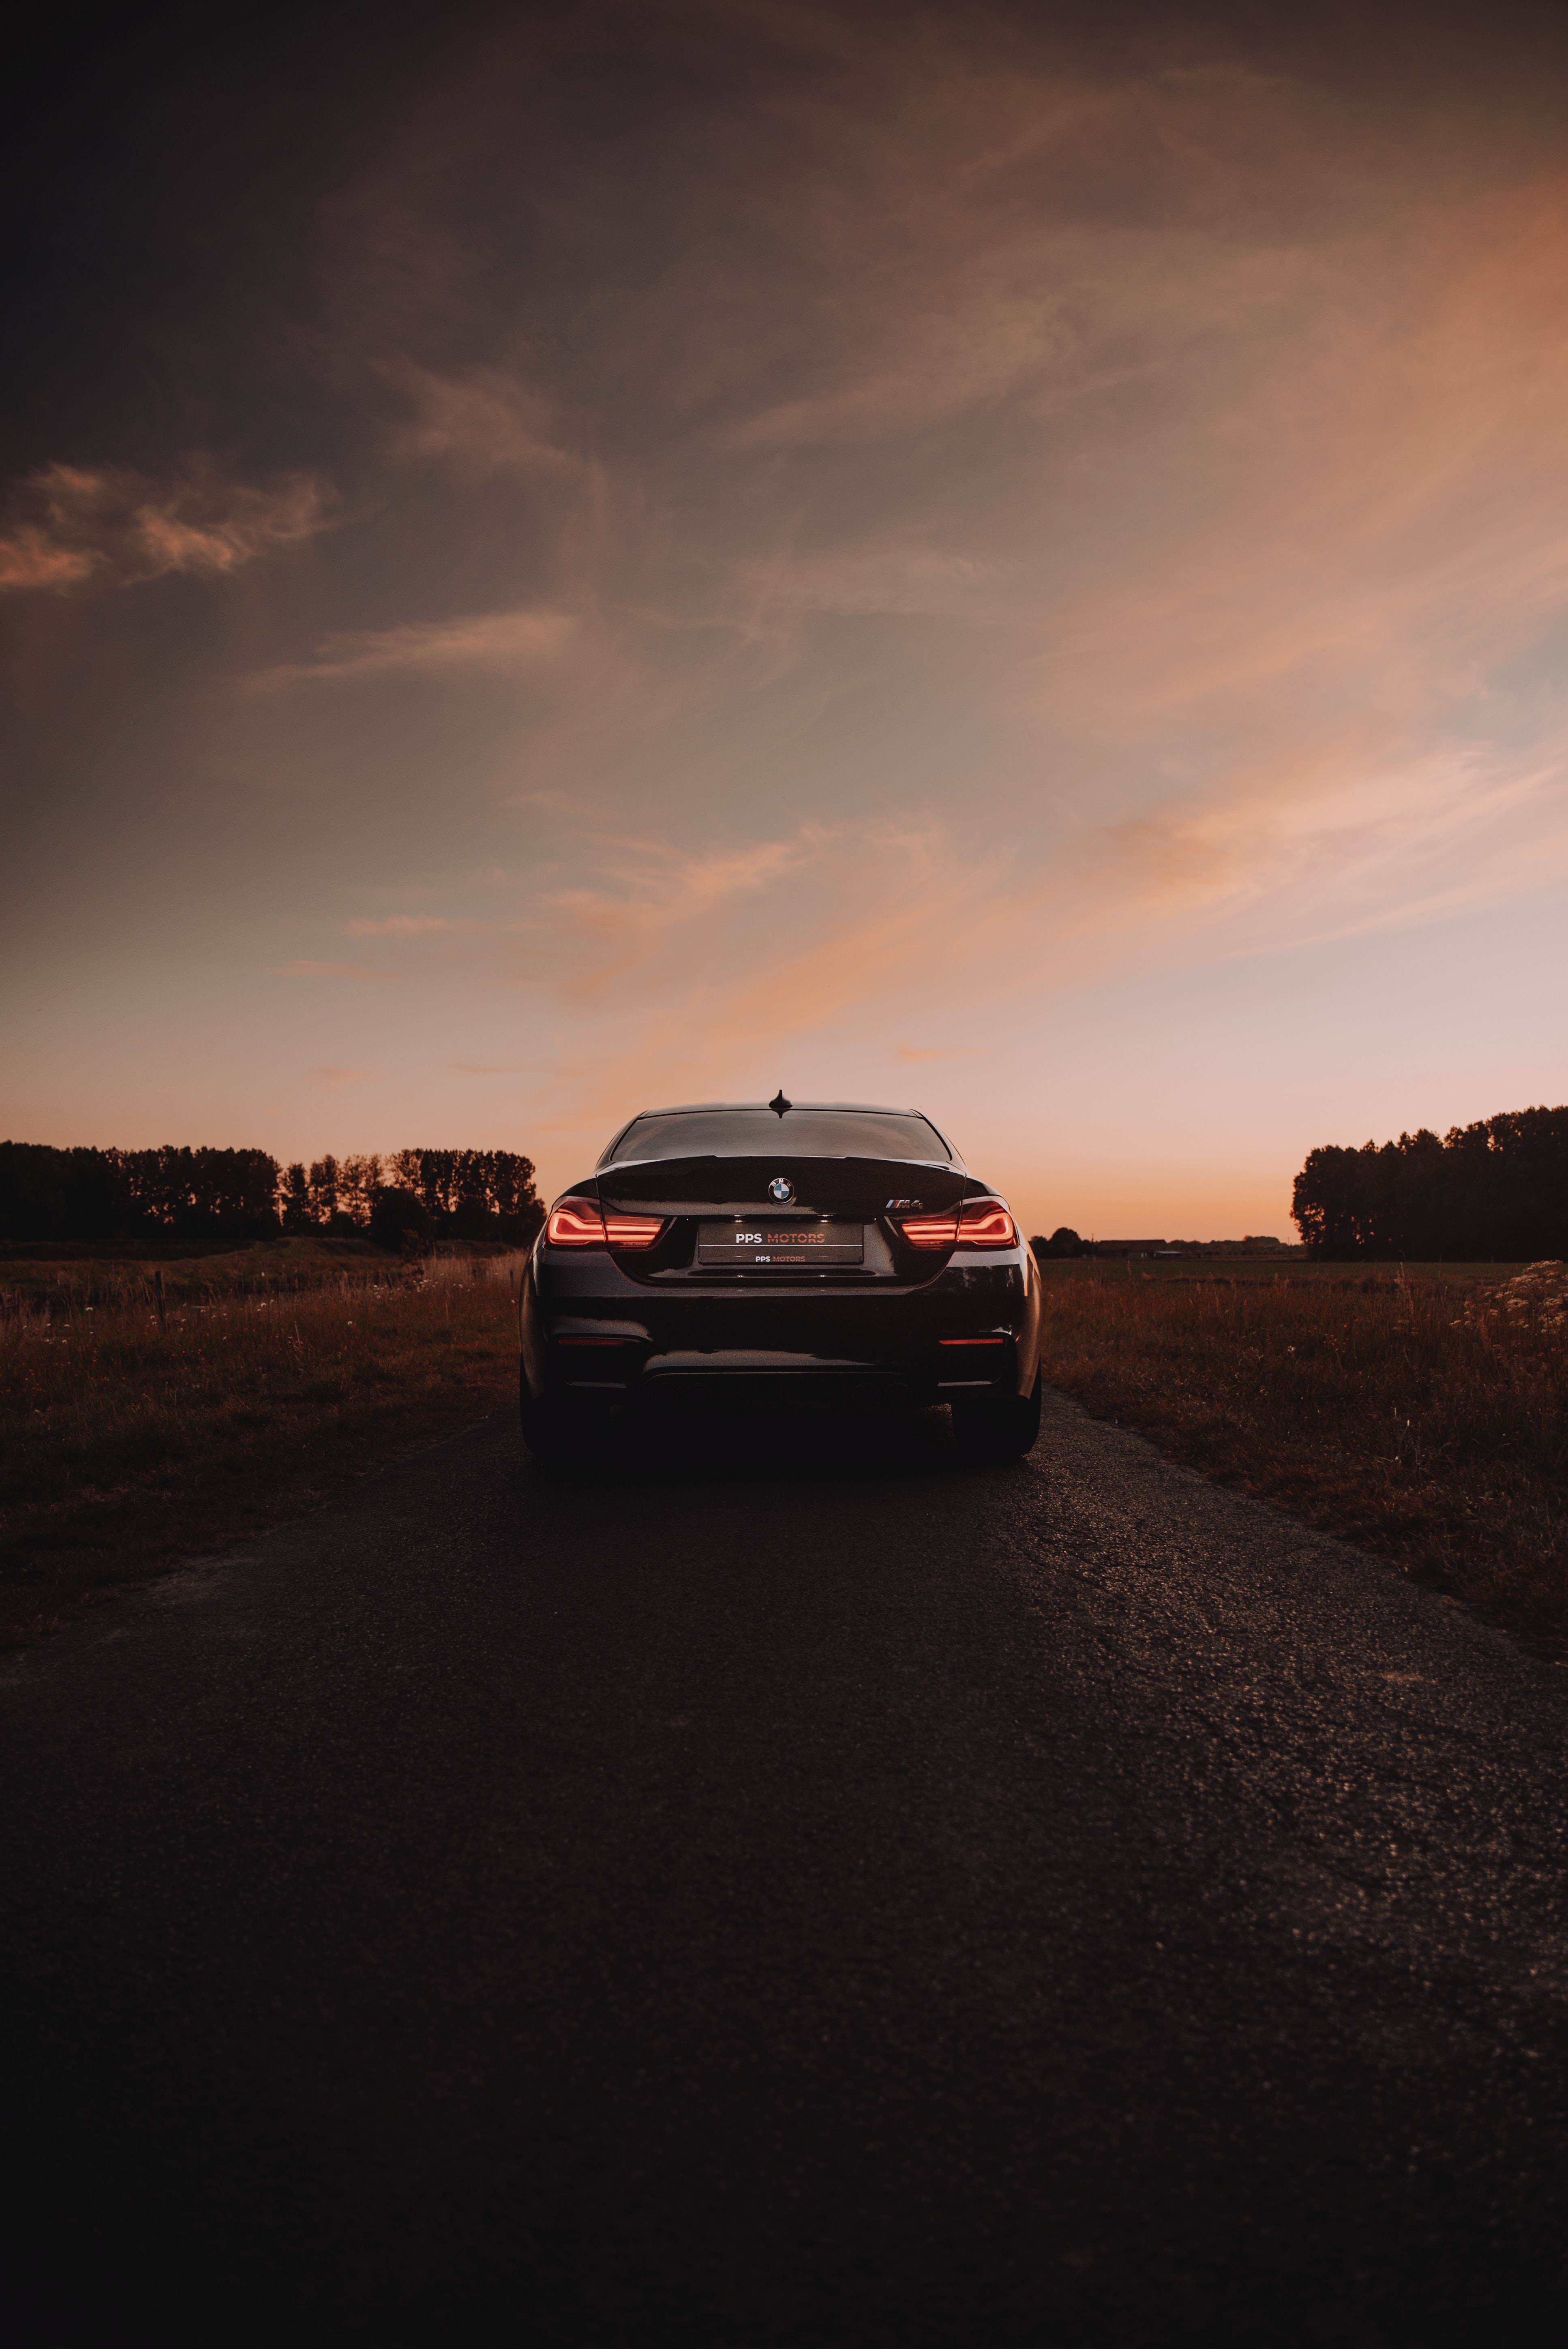 bmw, sports car, cars, sports, lights, car, back view, rear view, headlights, bmw m4 wallpapers for tablet